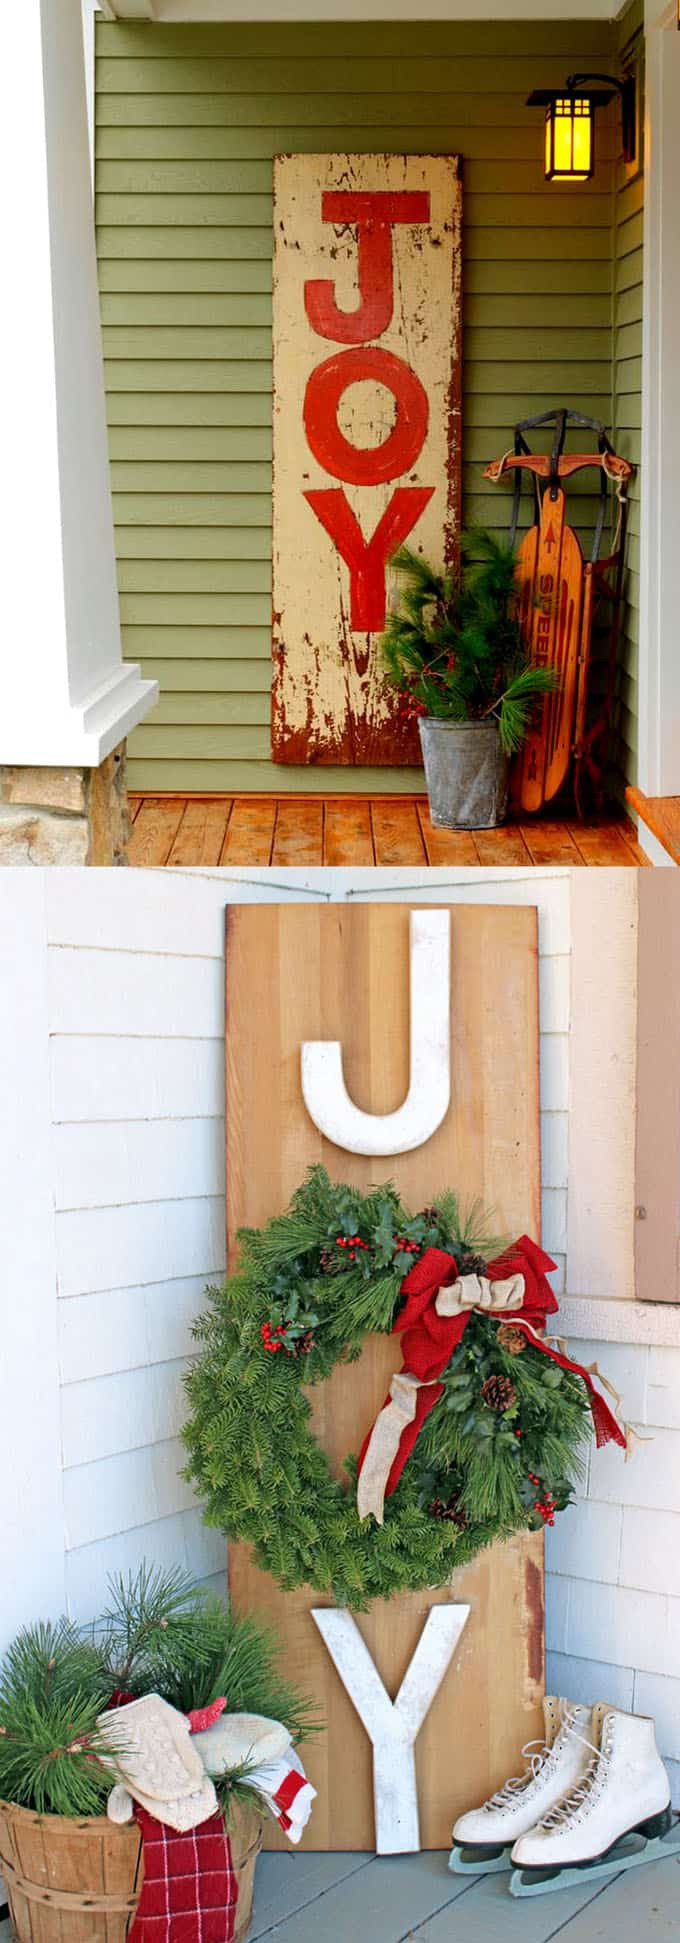 DIY Christmas Yard Decorations
 Gorgeous Outdoor Christmas Decorations 32 Best Ideas